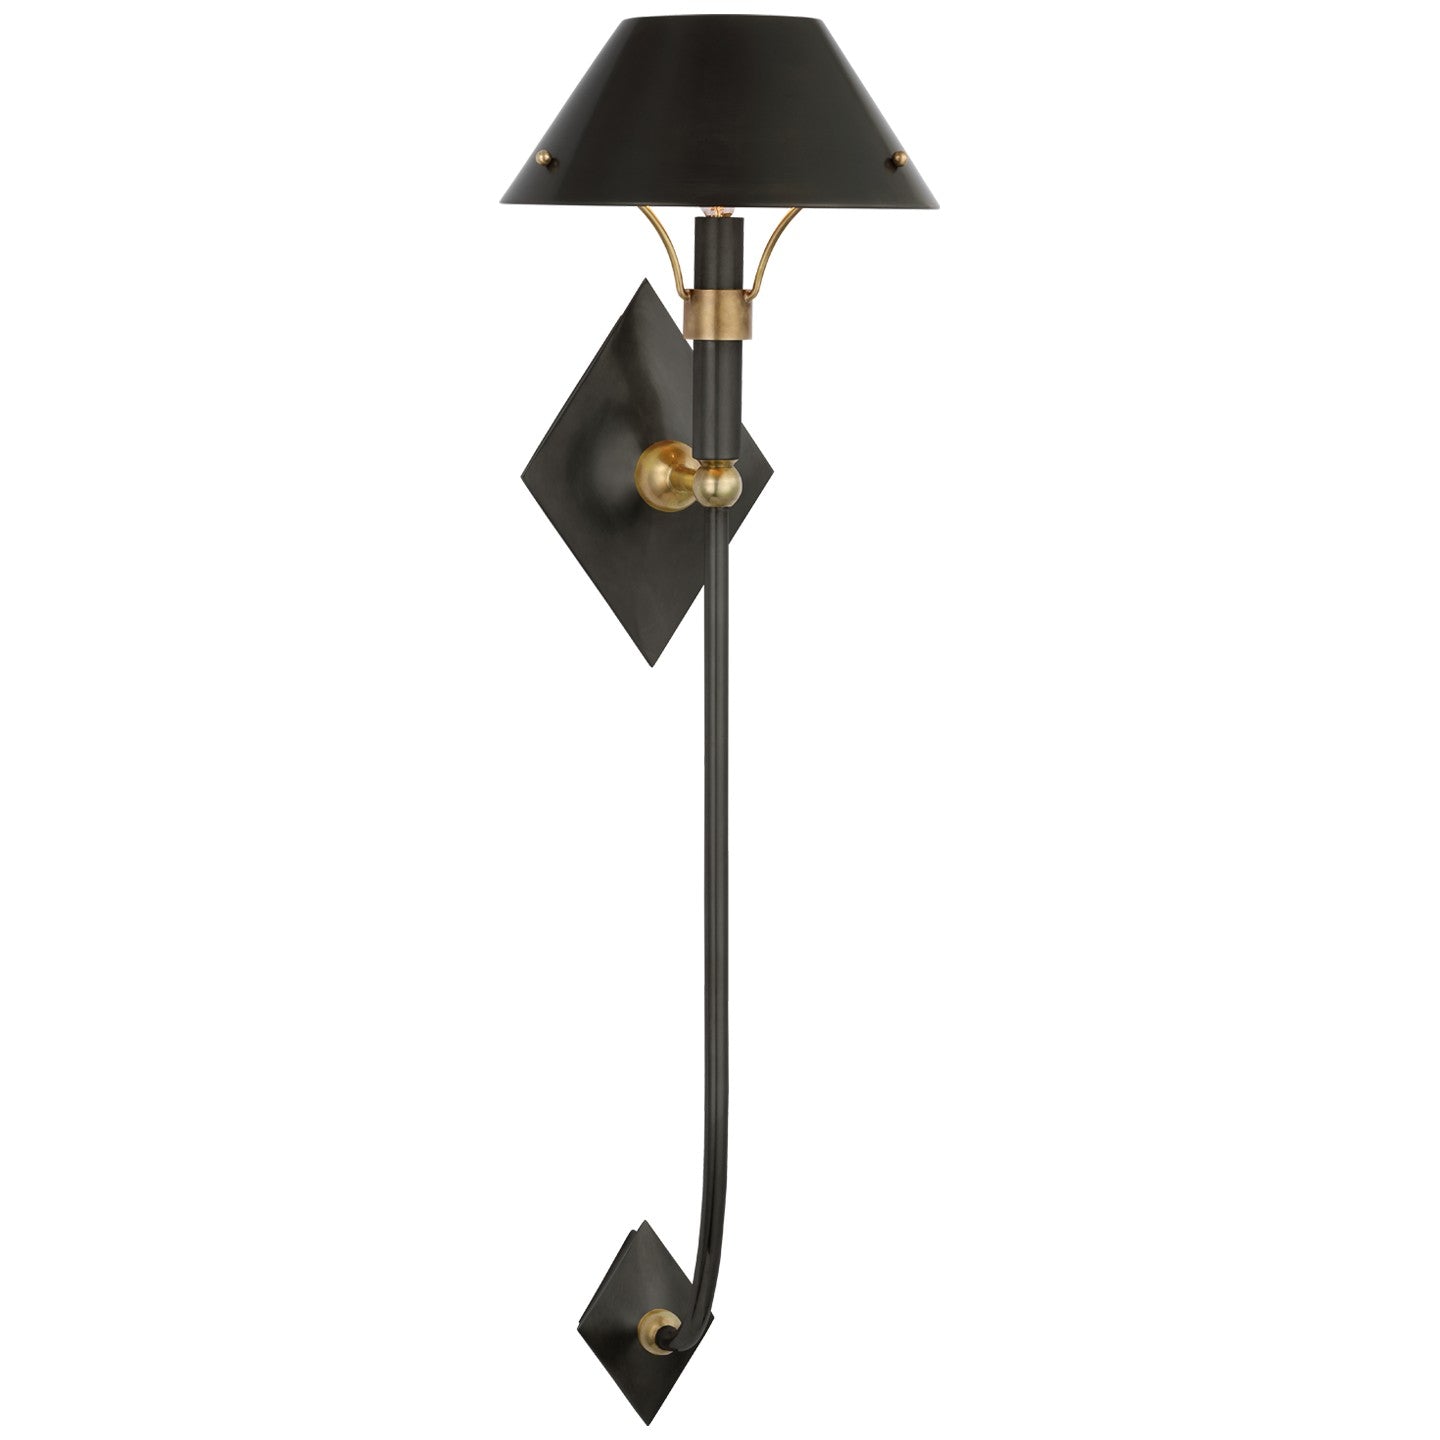 Visual Comfort Signature - TOB 2723BZ/HAB-BZ - LED Wall Sconce - Turlington - Bronze and Hand-Rubbed Antique Brass